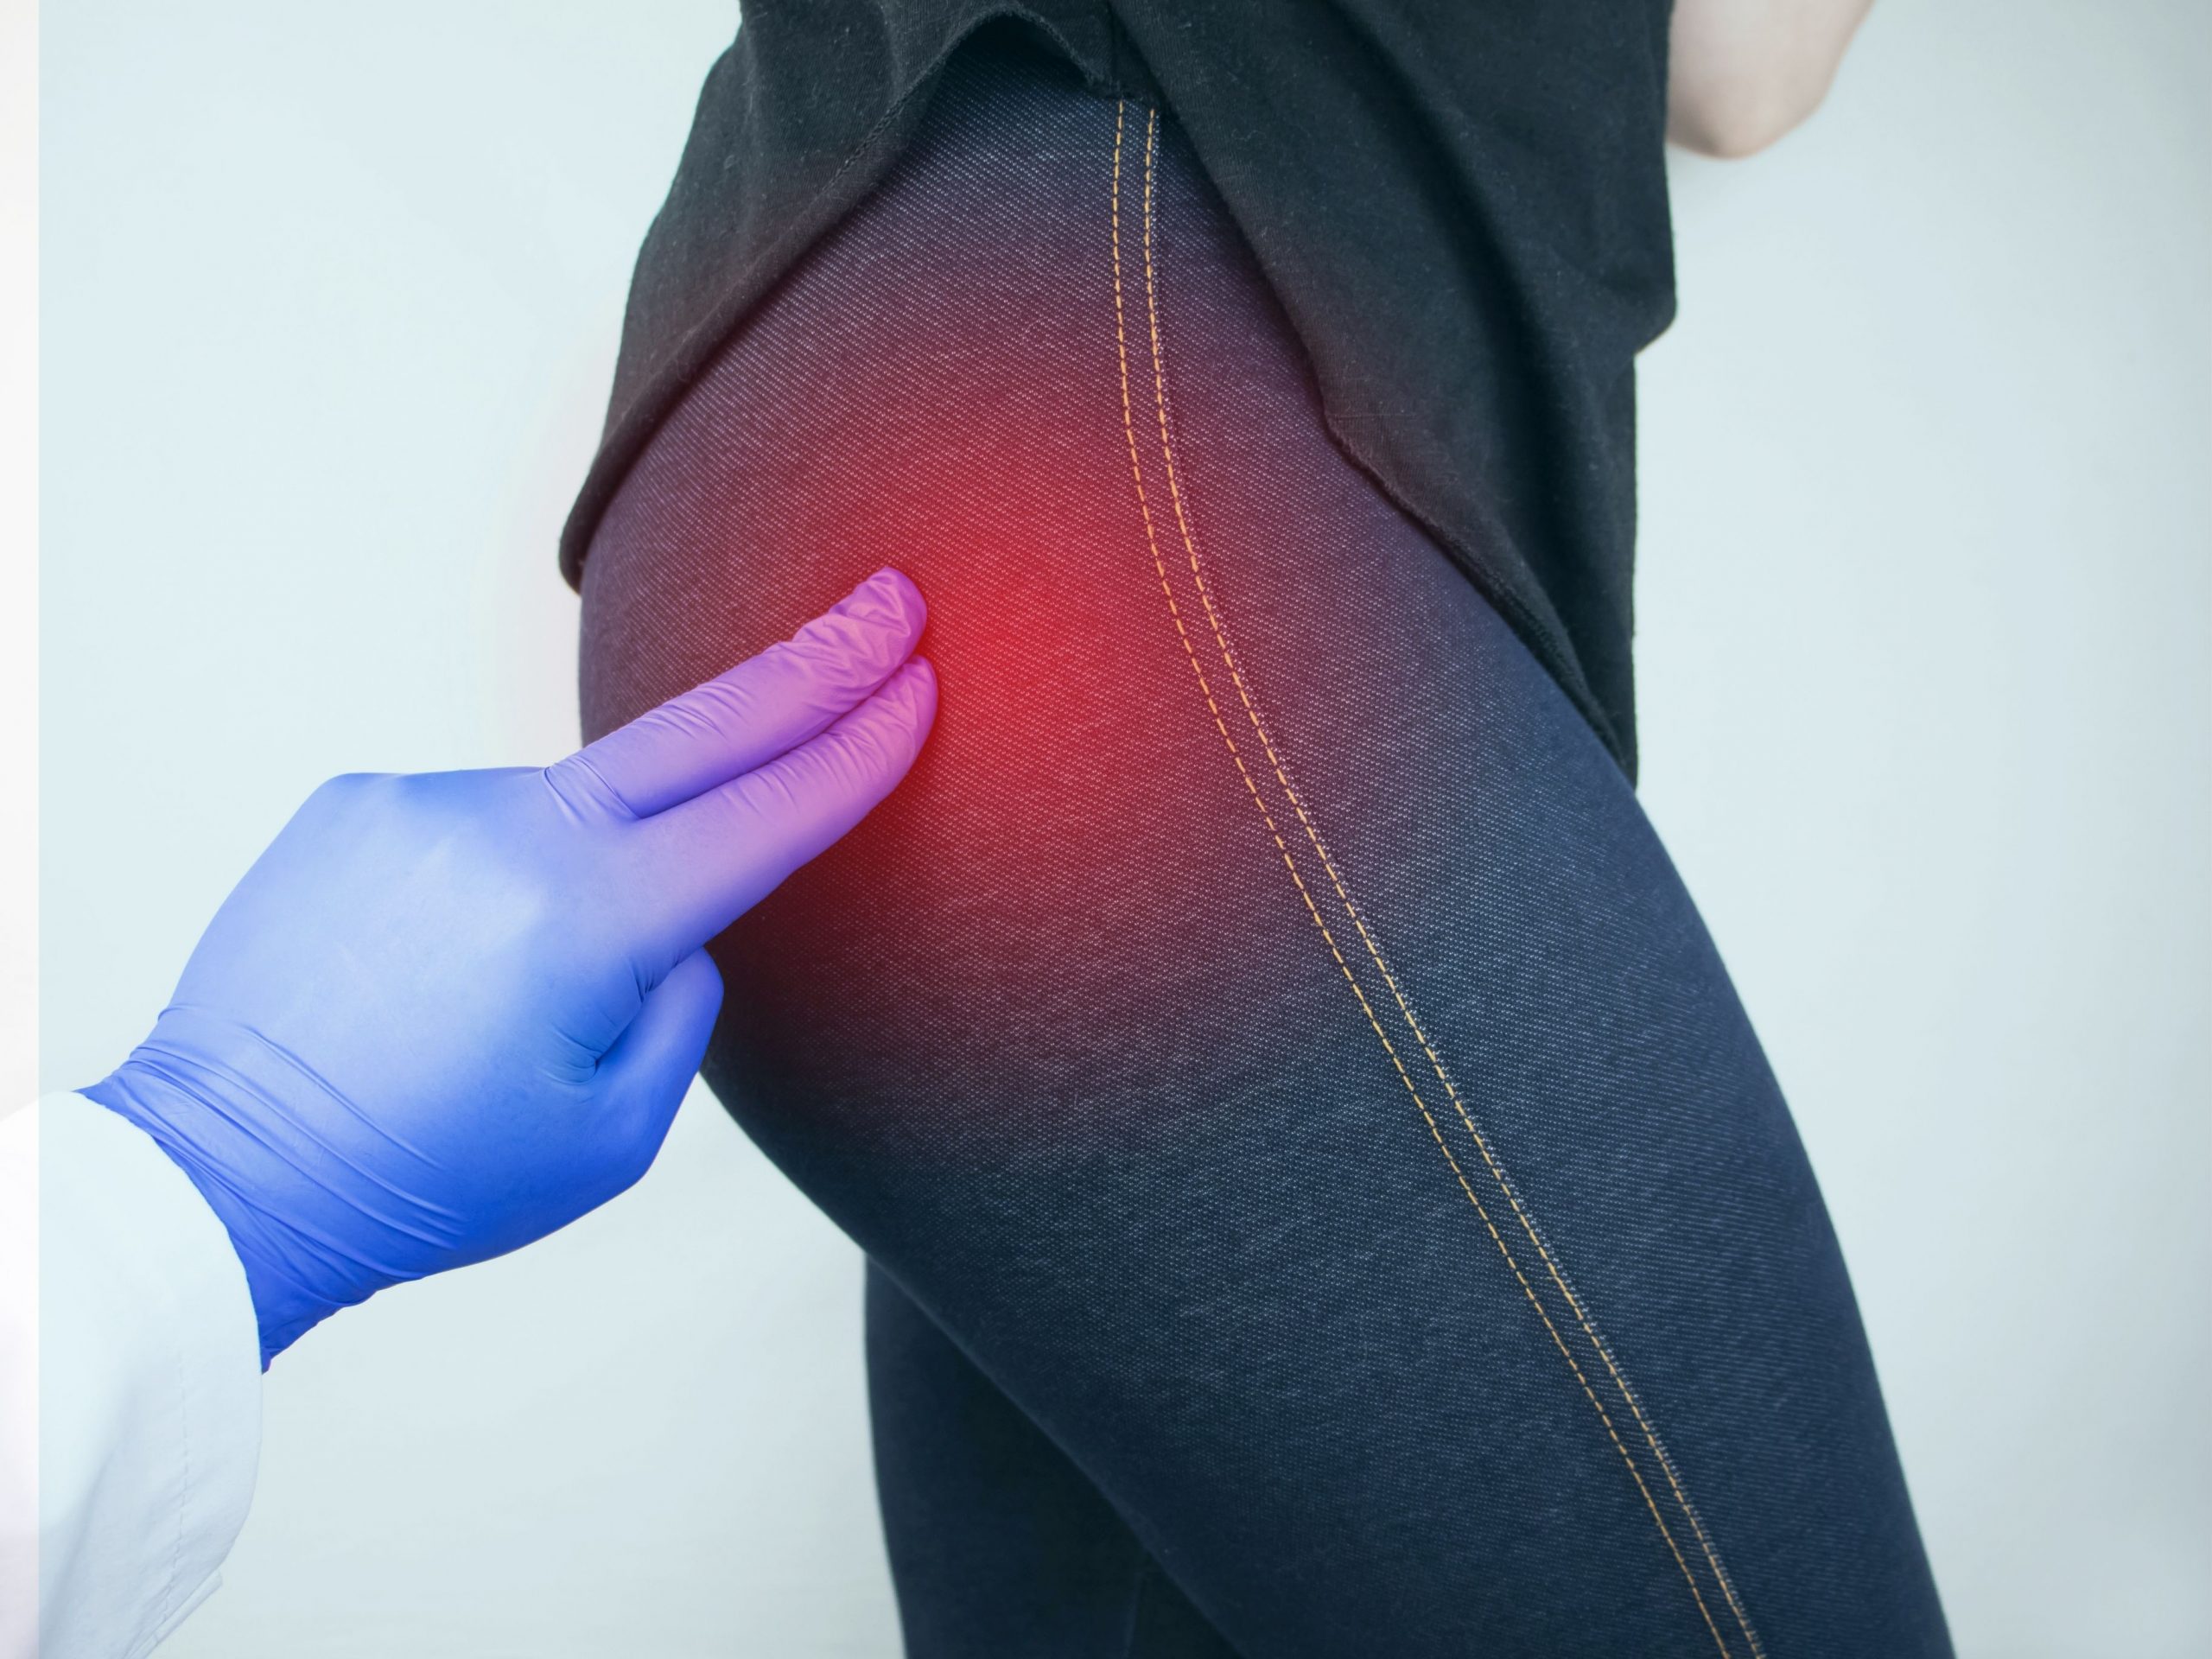 What Causes Buttock Pain And What Can Be Done About It